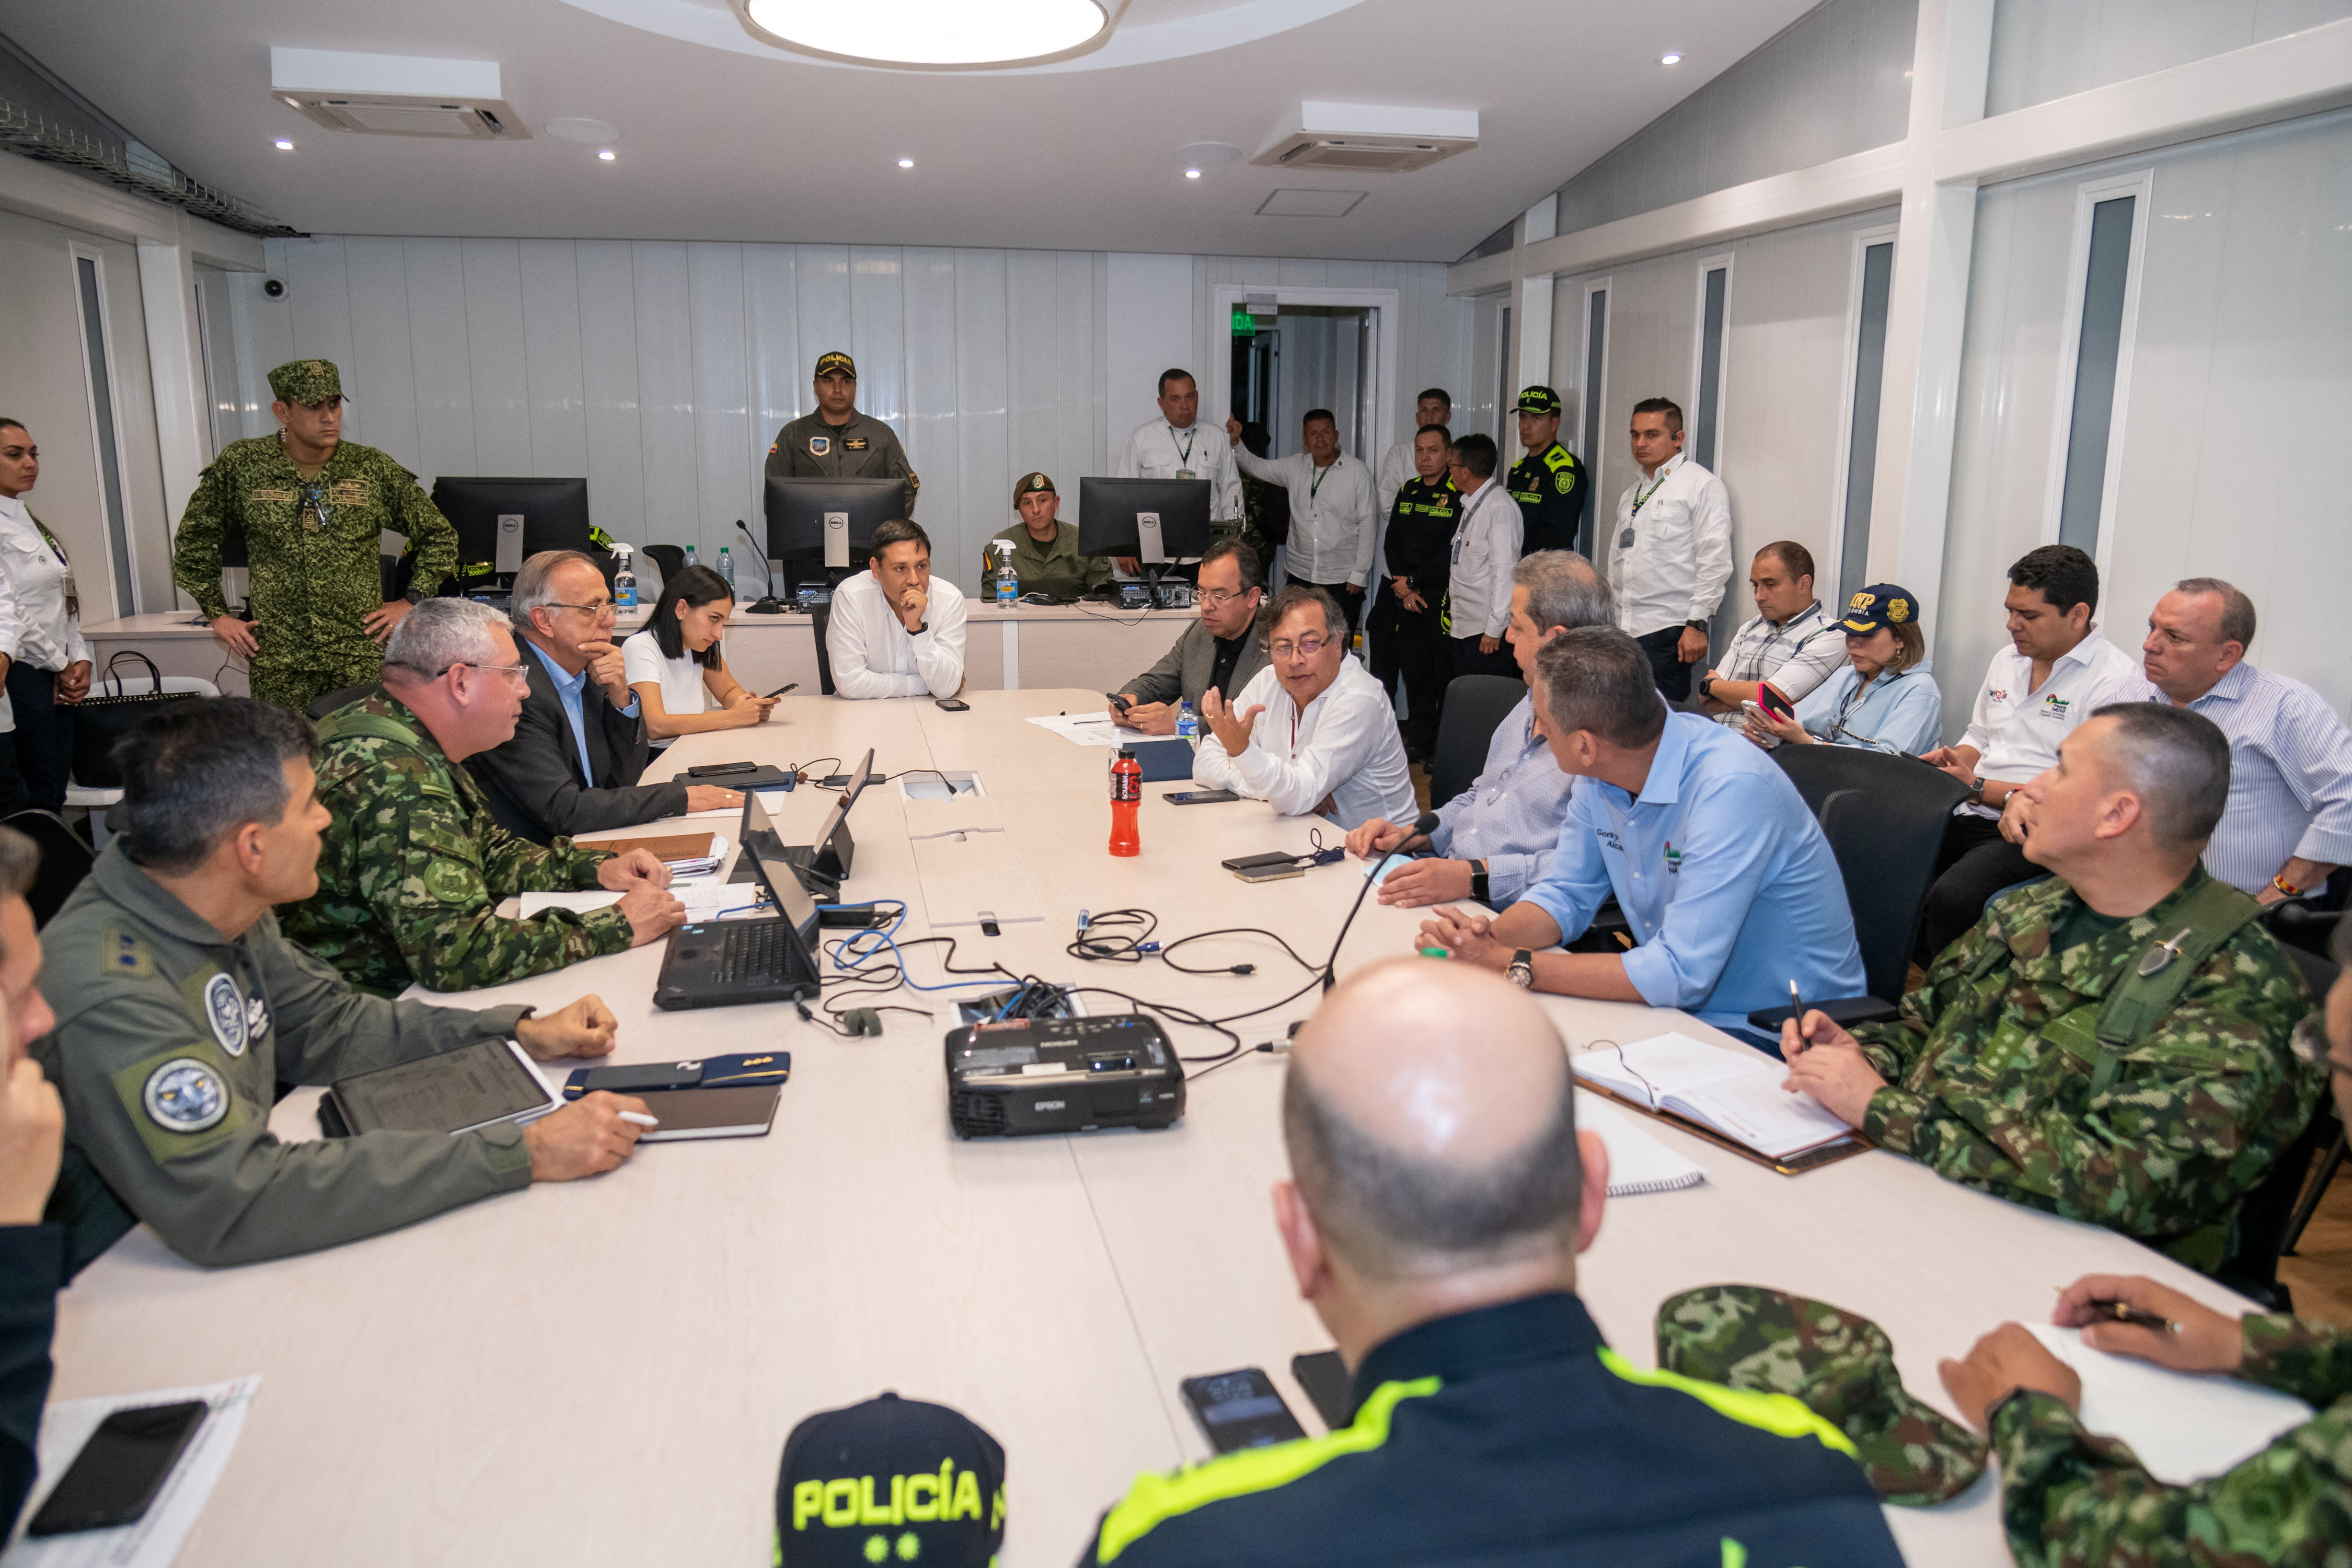 Colombian President Gustavo Petro speaks during a security council after an attack where several policemen died, at the Metropolitan Police building in Neiva